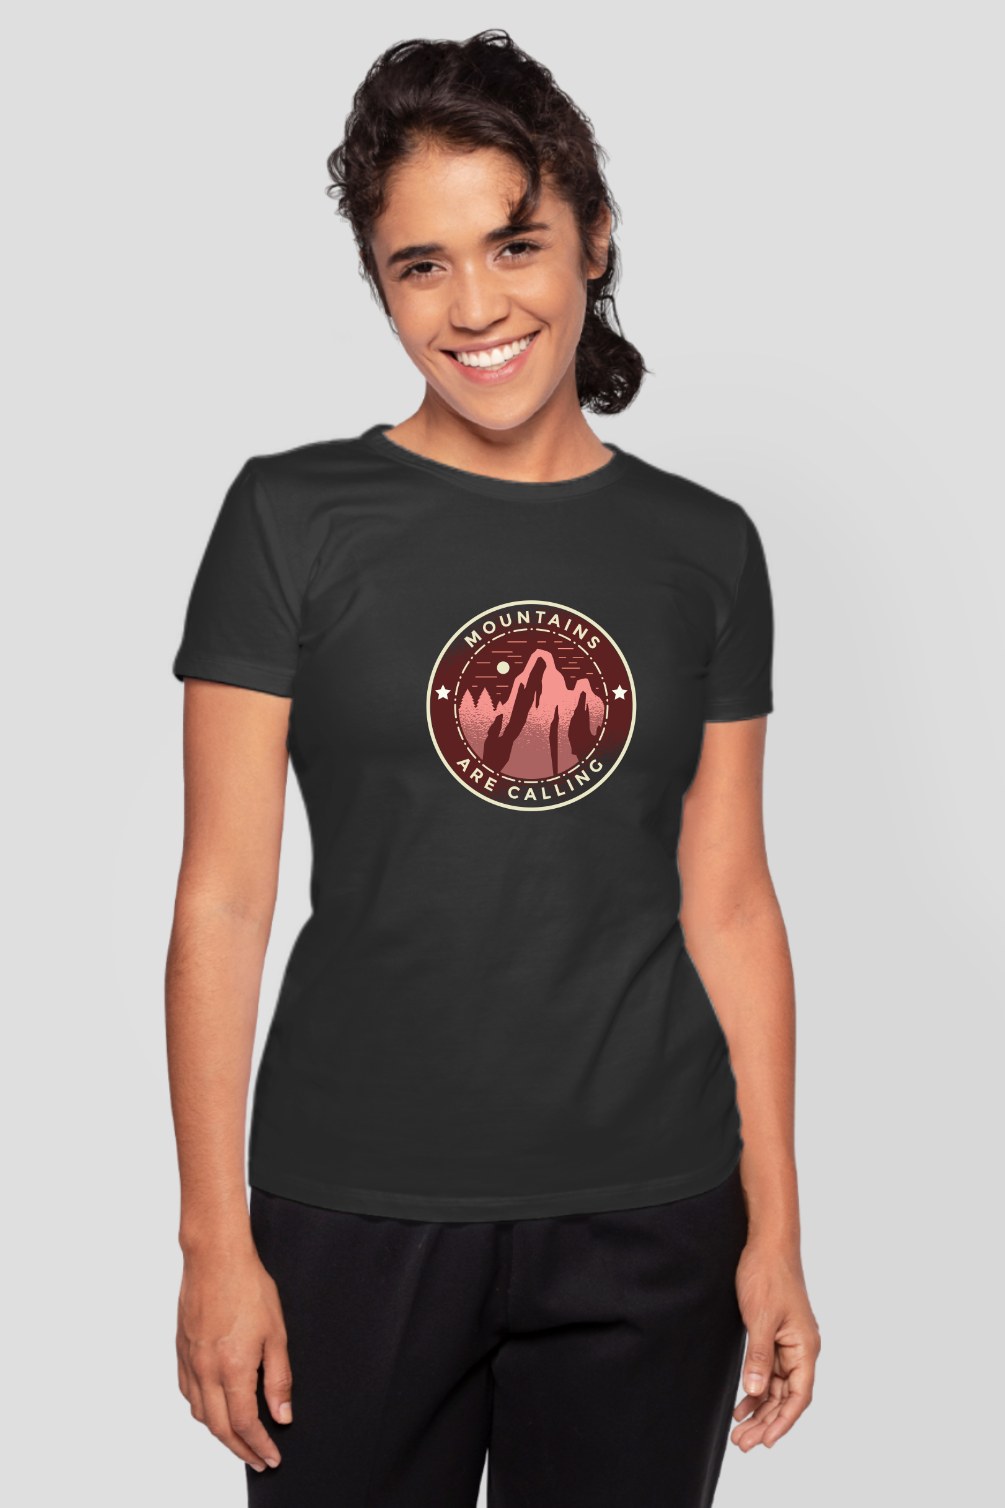 Mountains Are Calling Printed T-Shirt For Women - WowWaves - 7